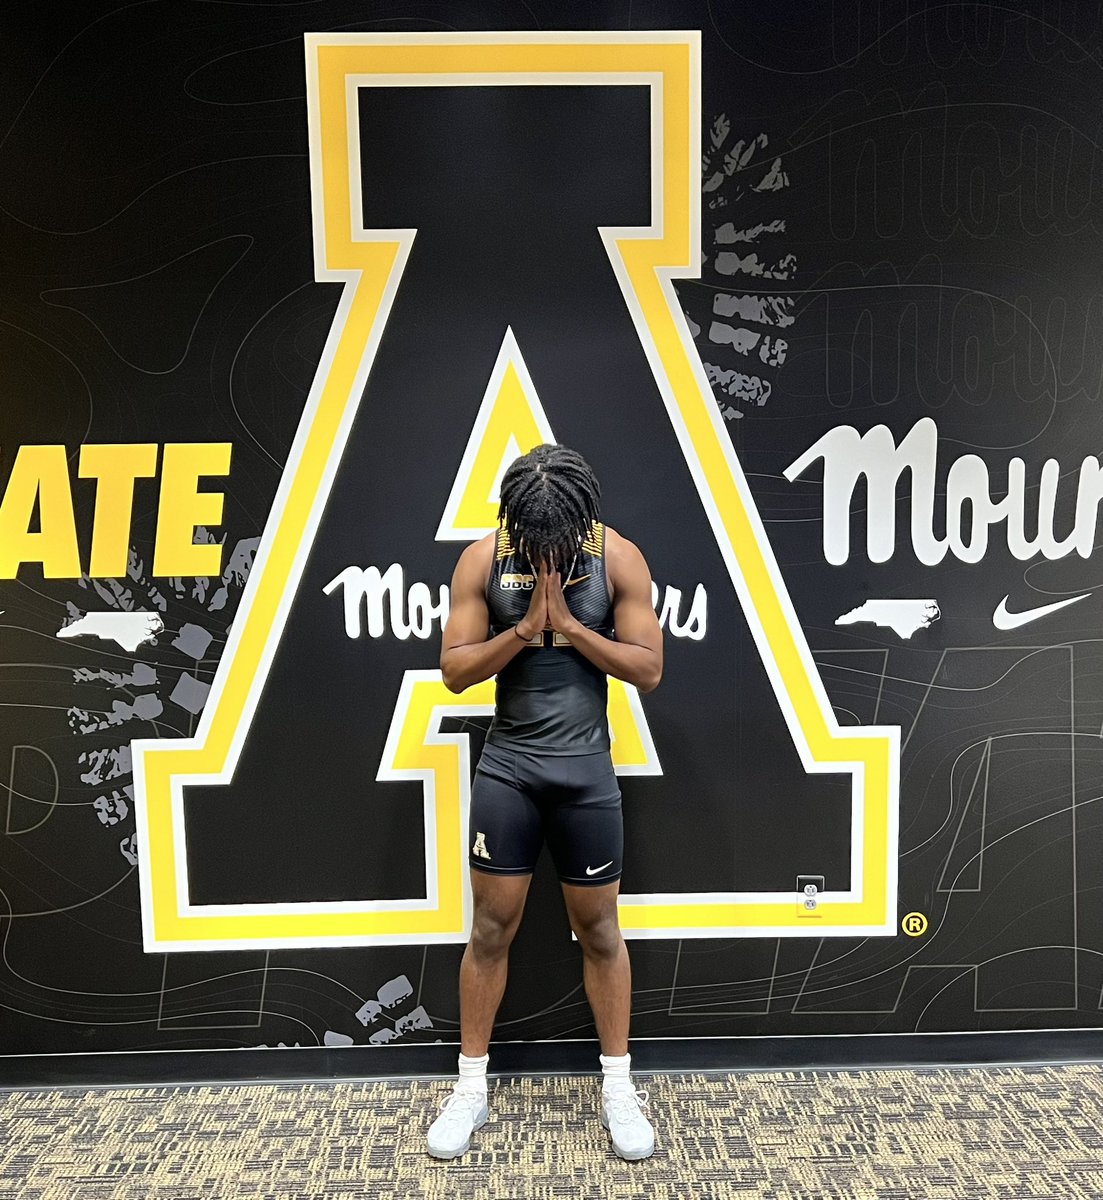 Had a great Official Visit at Appalachian State University today! Thank you @McLean26 for the invite! @DrewMatthewsKU @AppTF_XC @FRAathletics @tnmilesplit